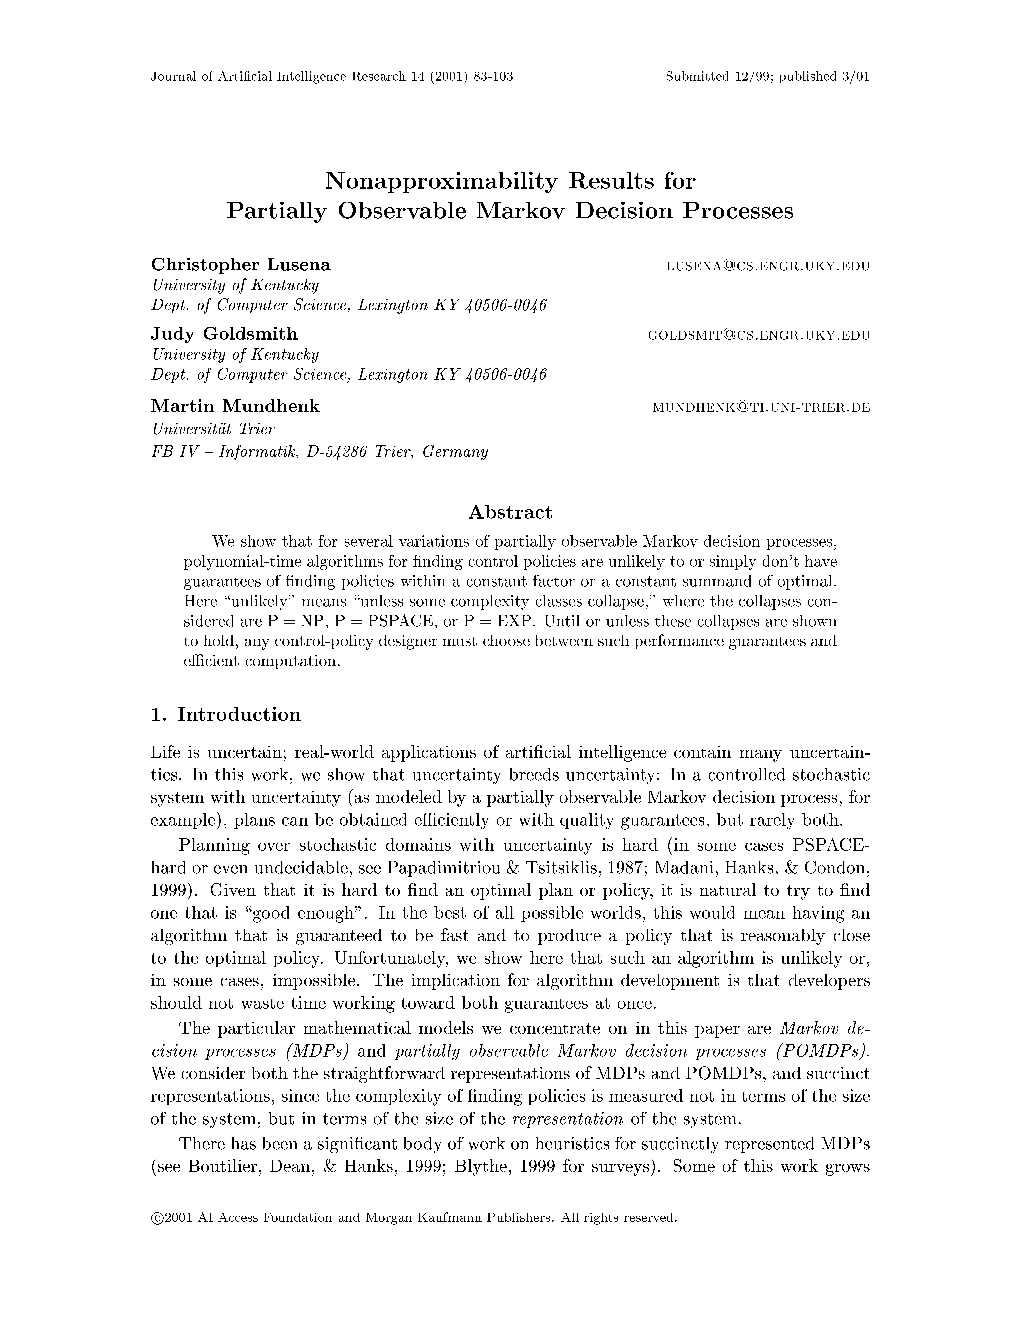 Nonapproximability Results for Partially Observable Markov